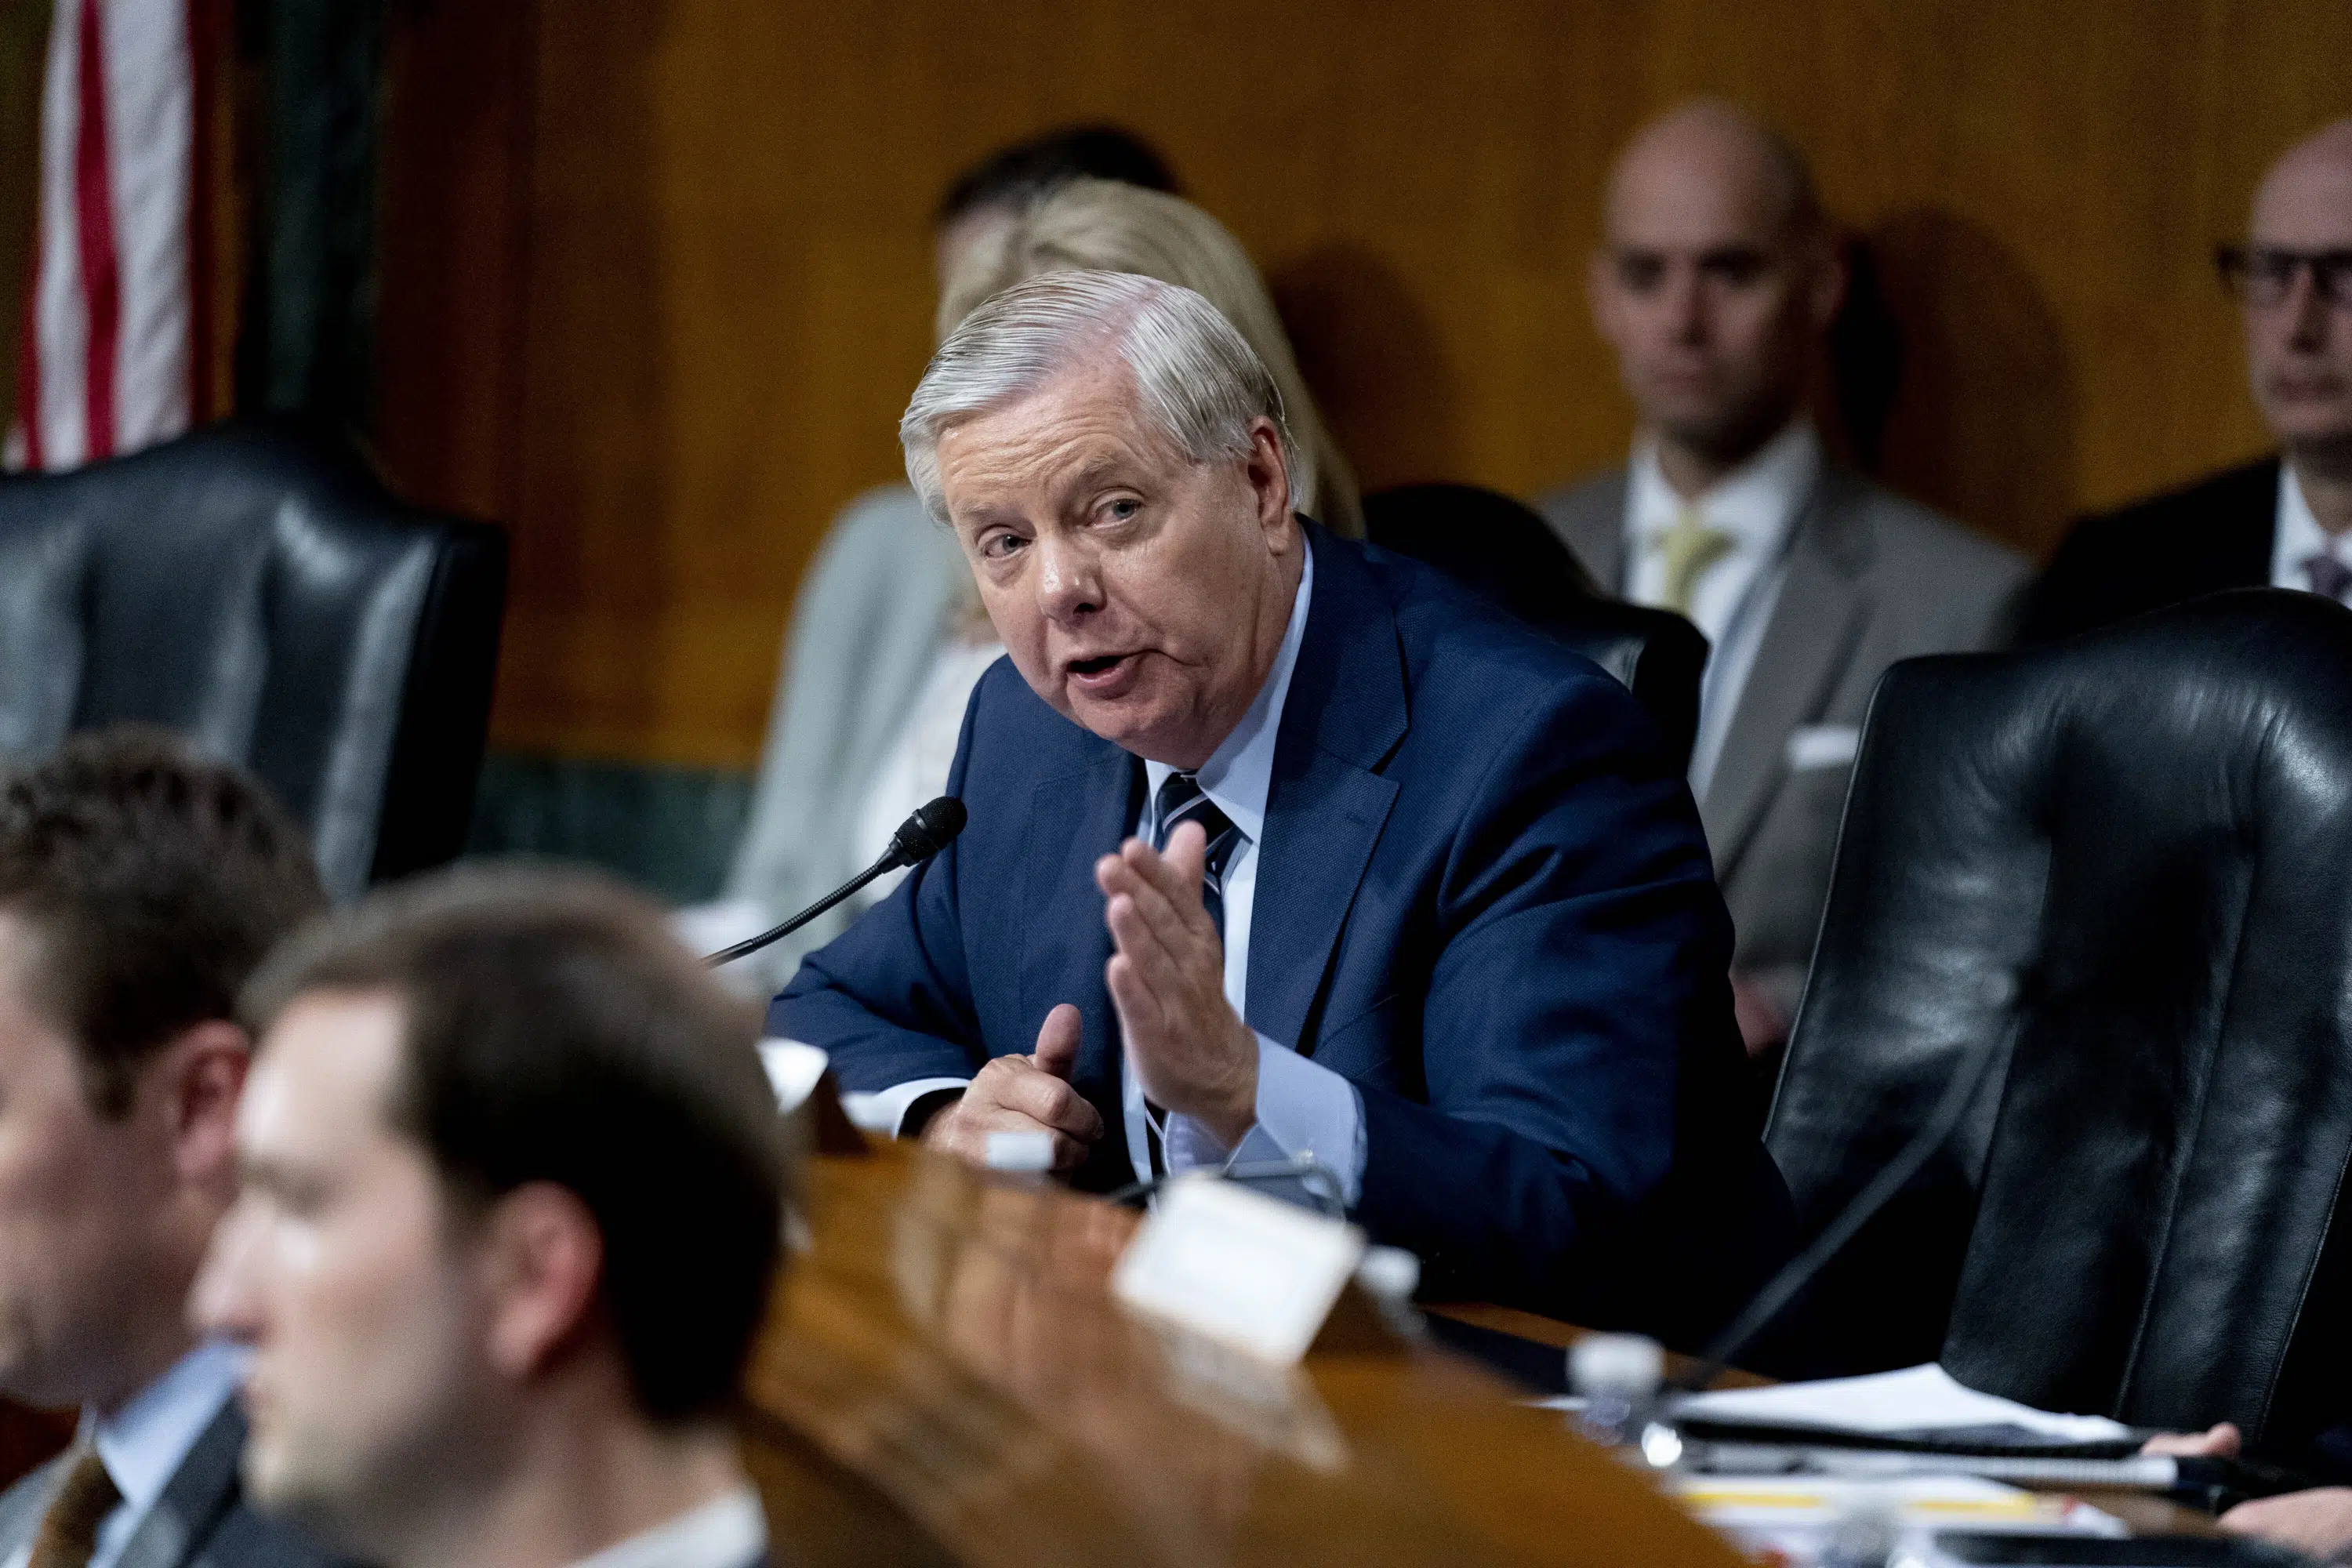 Russia issues arrest warrant for Lindsey Graham over Ukraine comments - The Associated Press